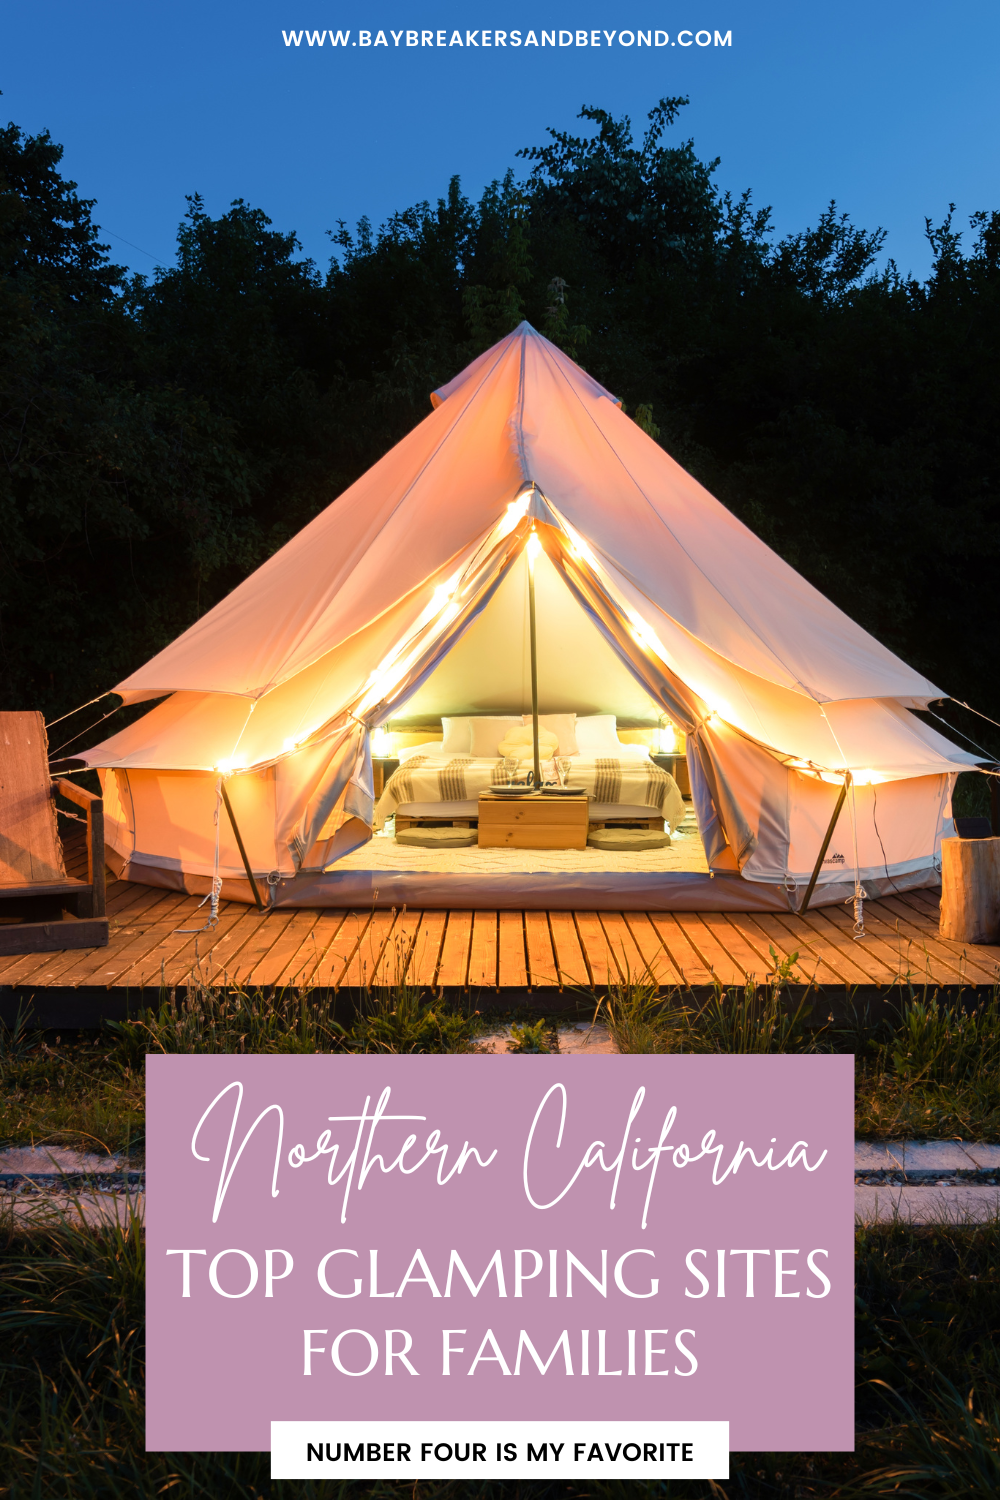 Northern California: Top Glamping Sites for Families